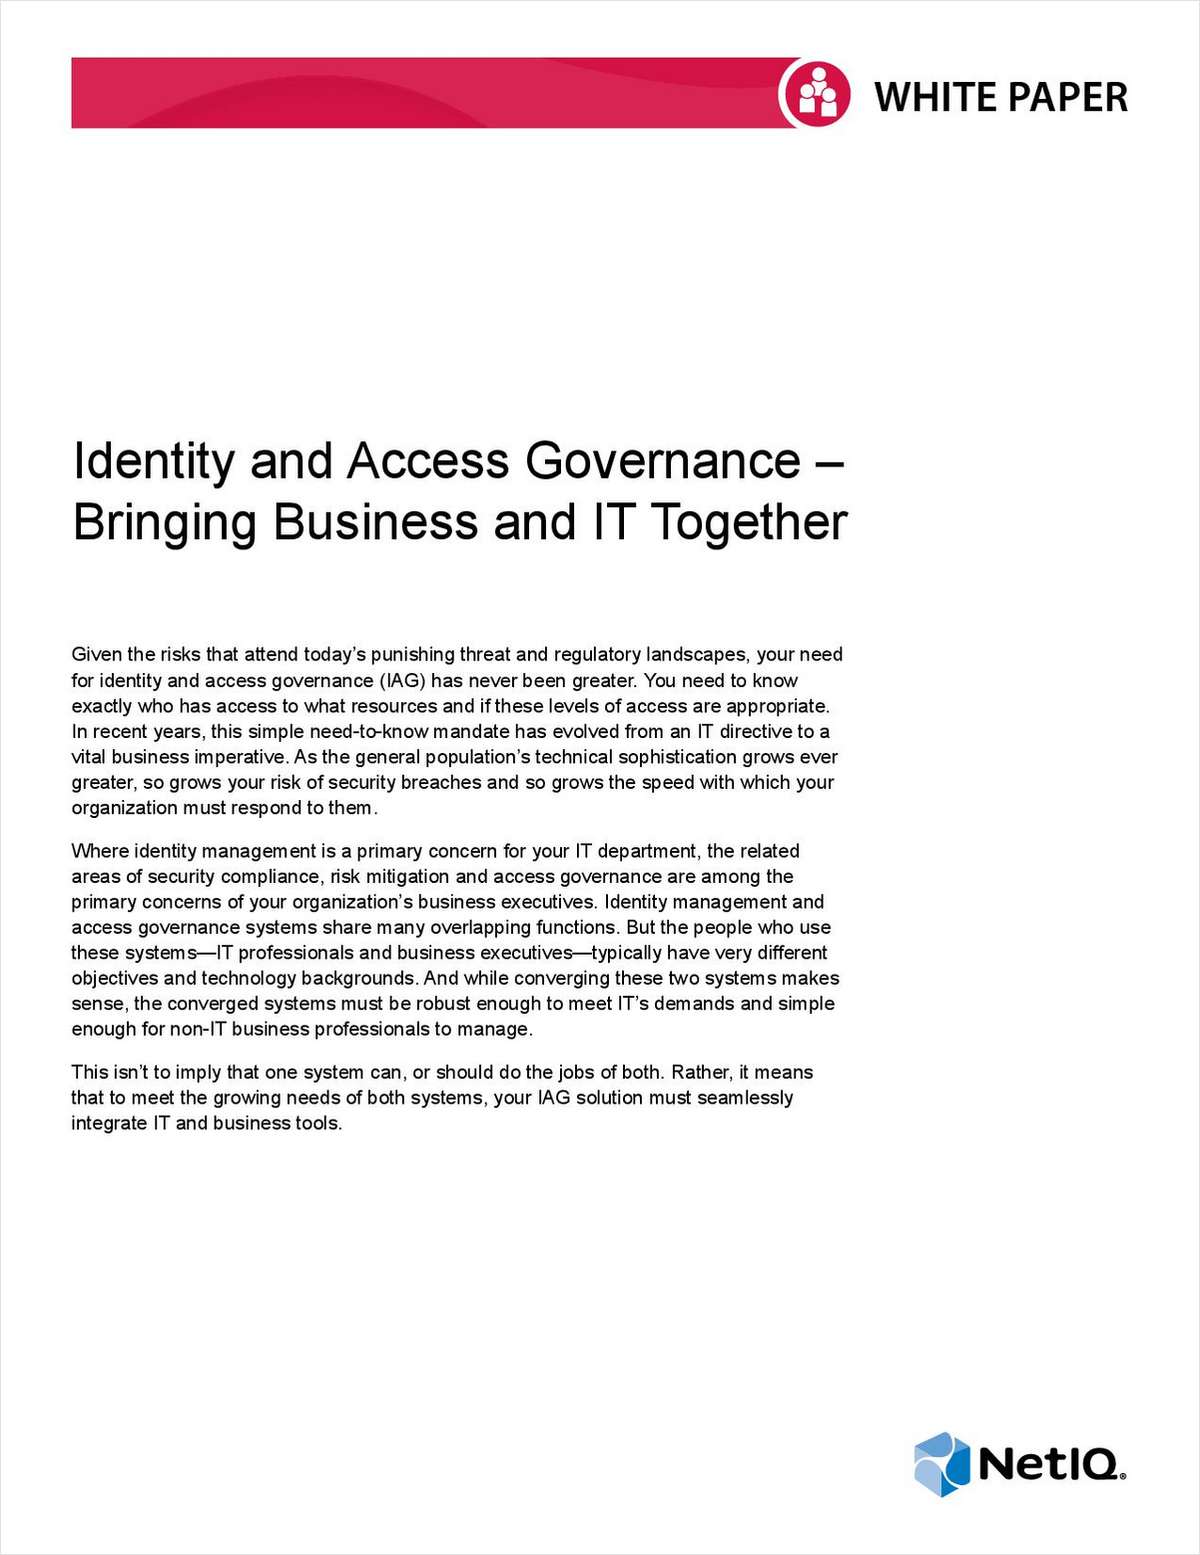 Identity and Access Governance: Bringing Business and IT Together